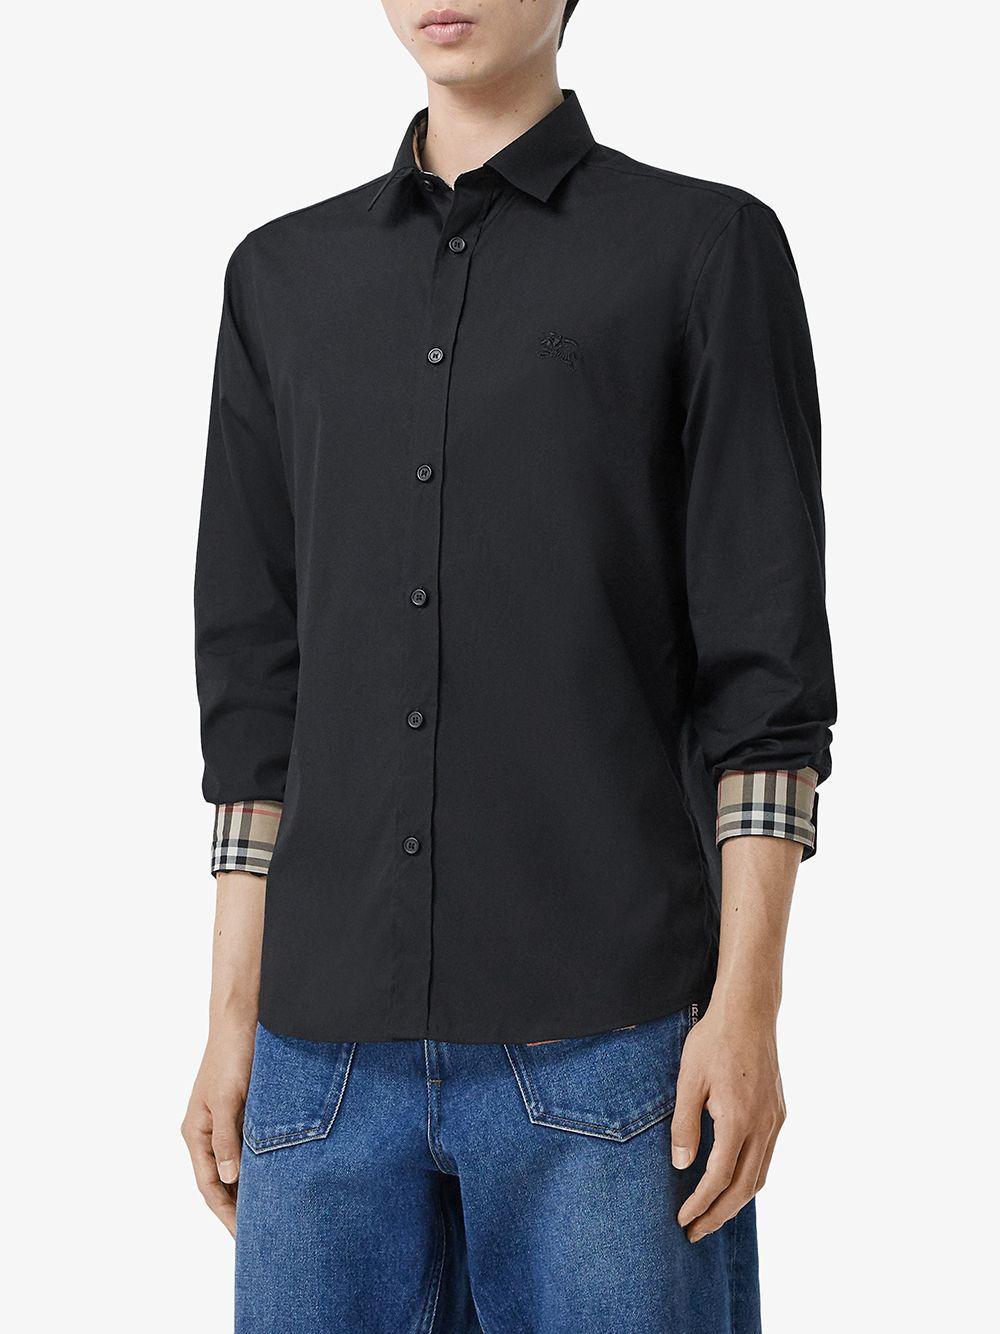 Burberry Cotton Embroidered Logo Shirt in Black for Men - Lyst